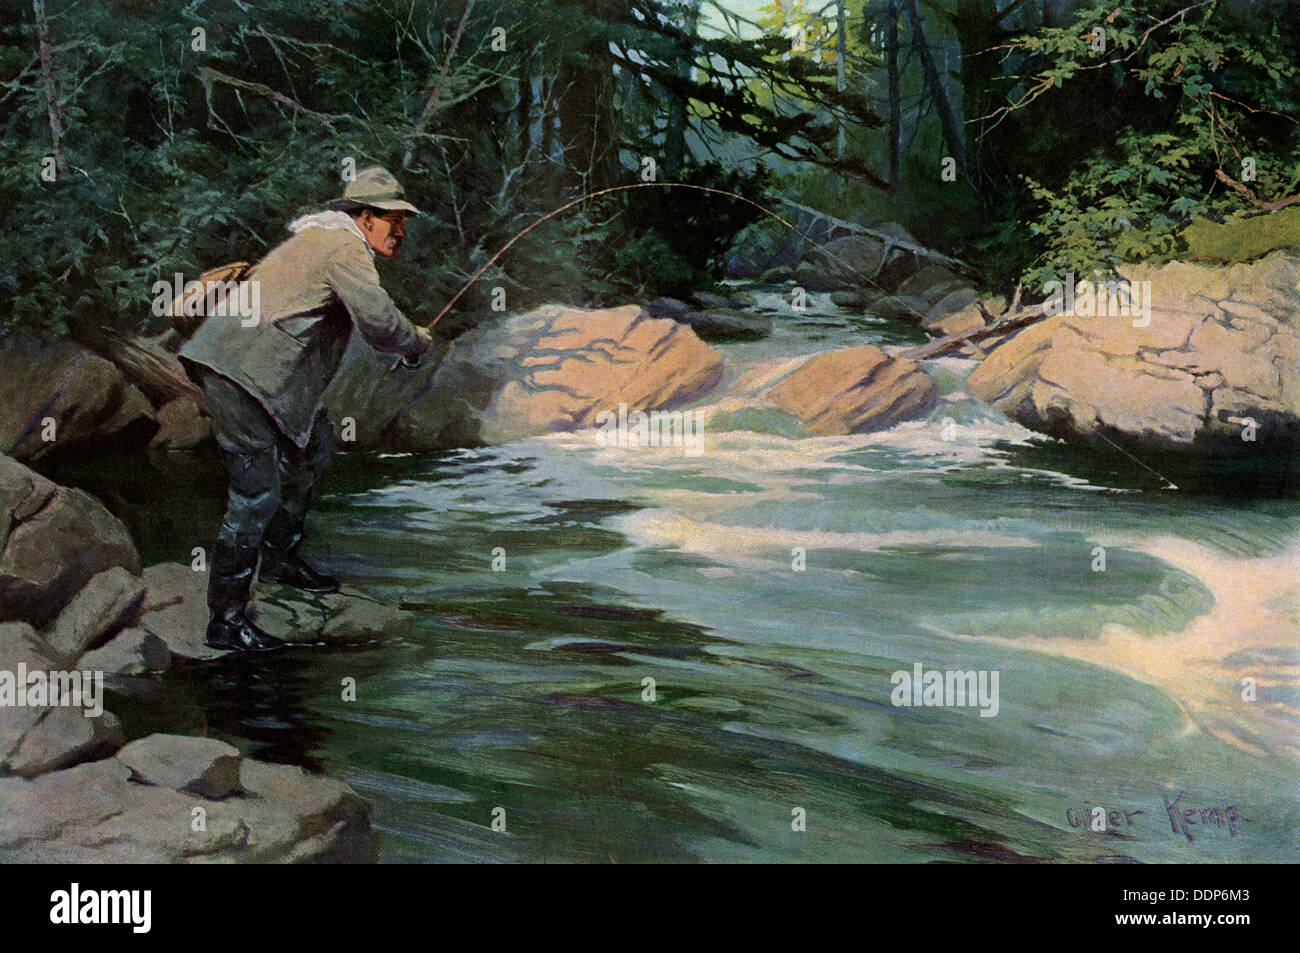 https://c8.alamy.com/comp/DDP6M3/trout-on-the-hook-of-a-fisherman-in-the-north-woods-circa-1900-printed-DDP6M3.jpg